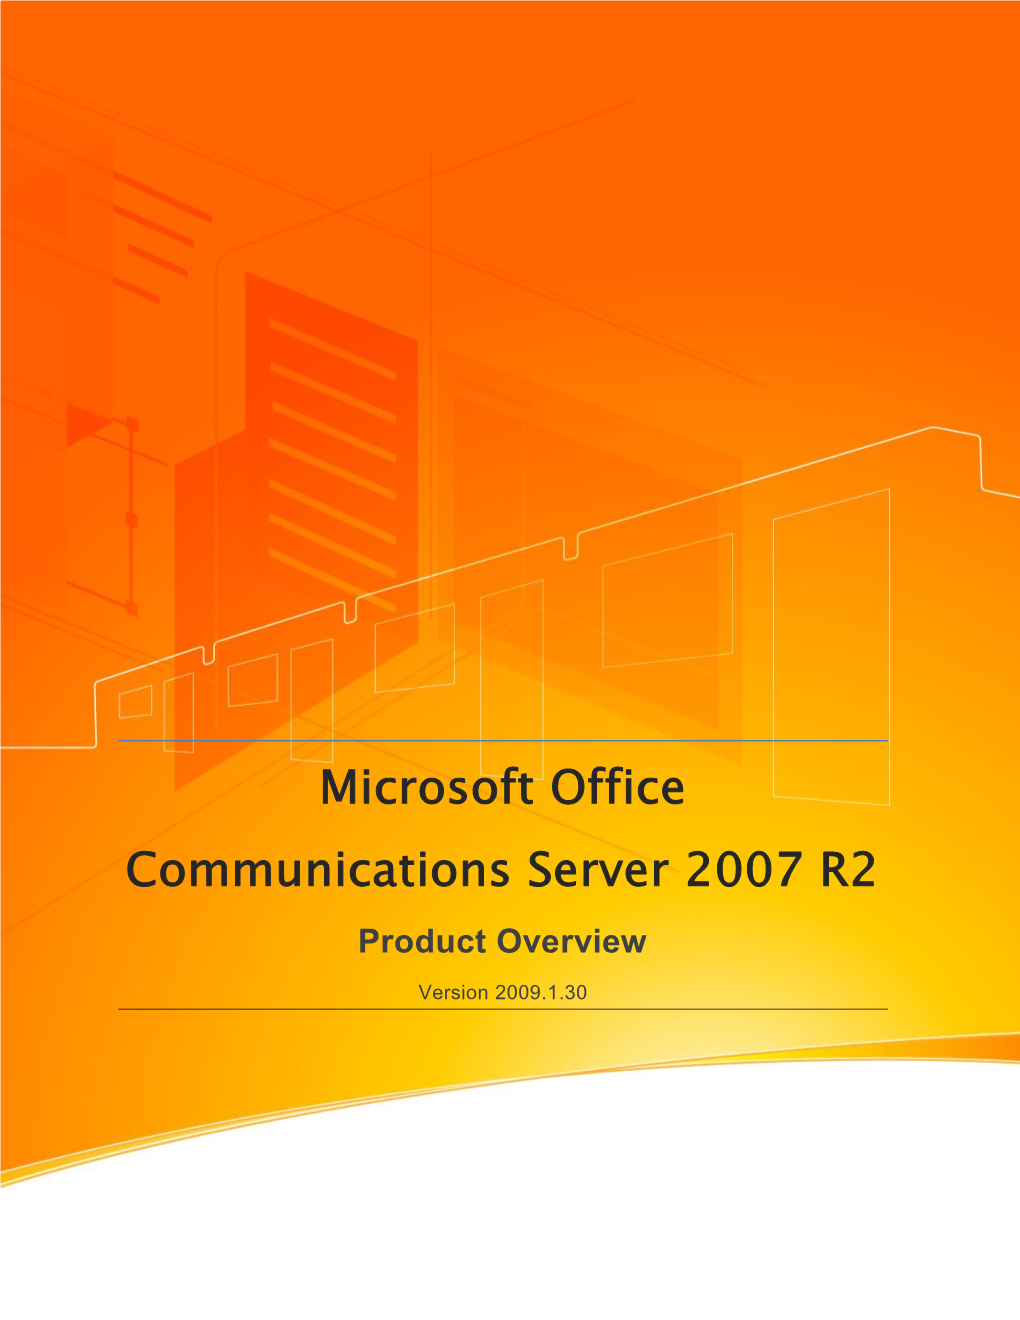 Microsoft Office Communications Server 2007 R2 Product Overview